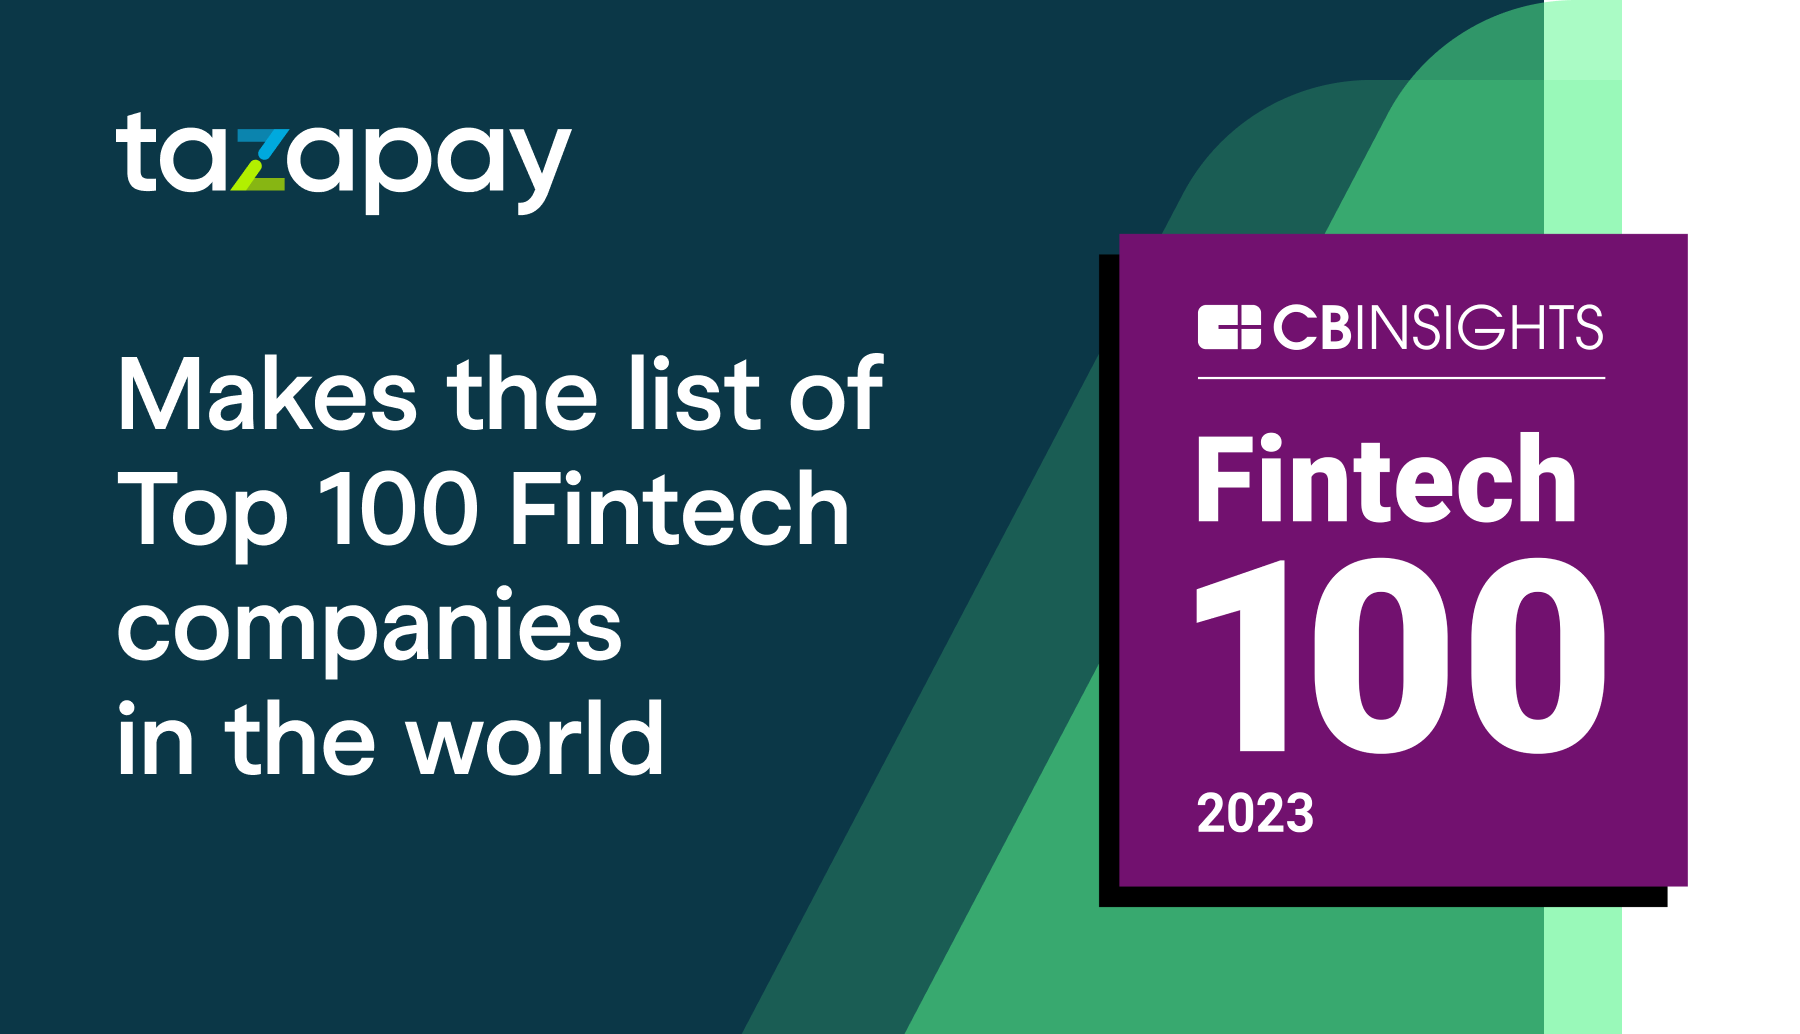 Omoney Named to the 2023 CB Insights' Fintech 100 List